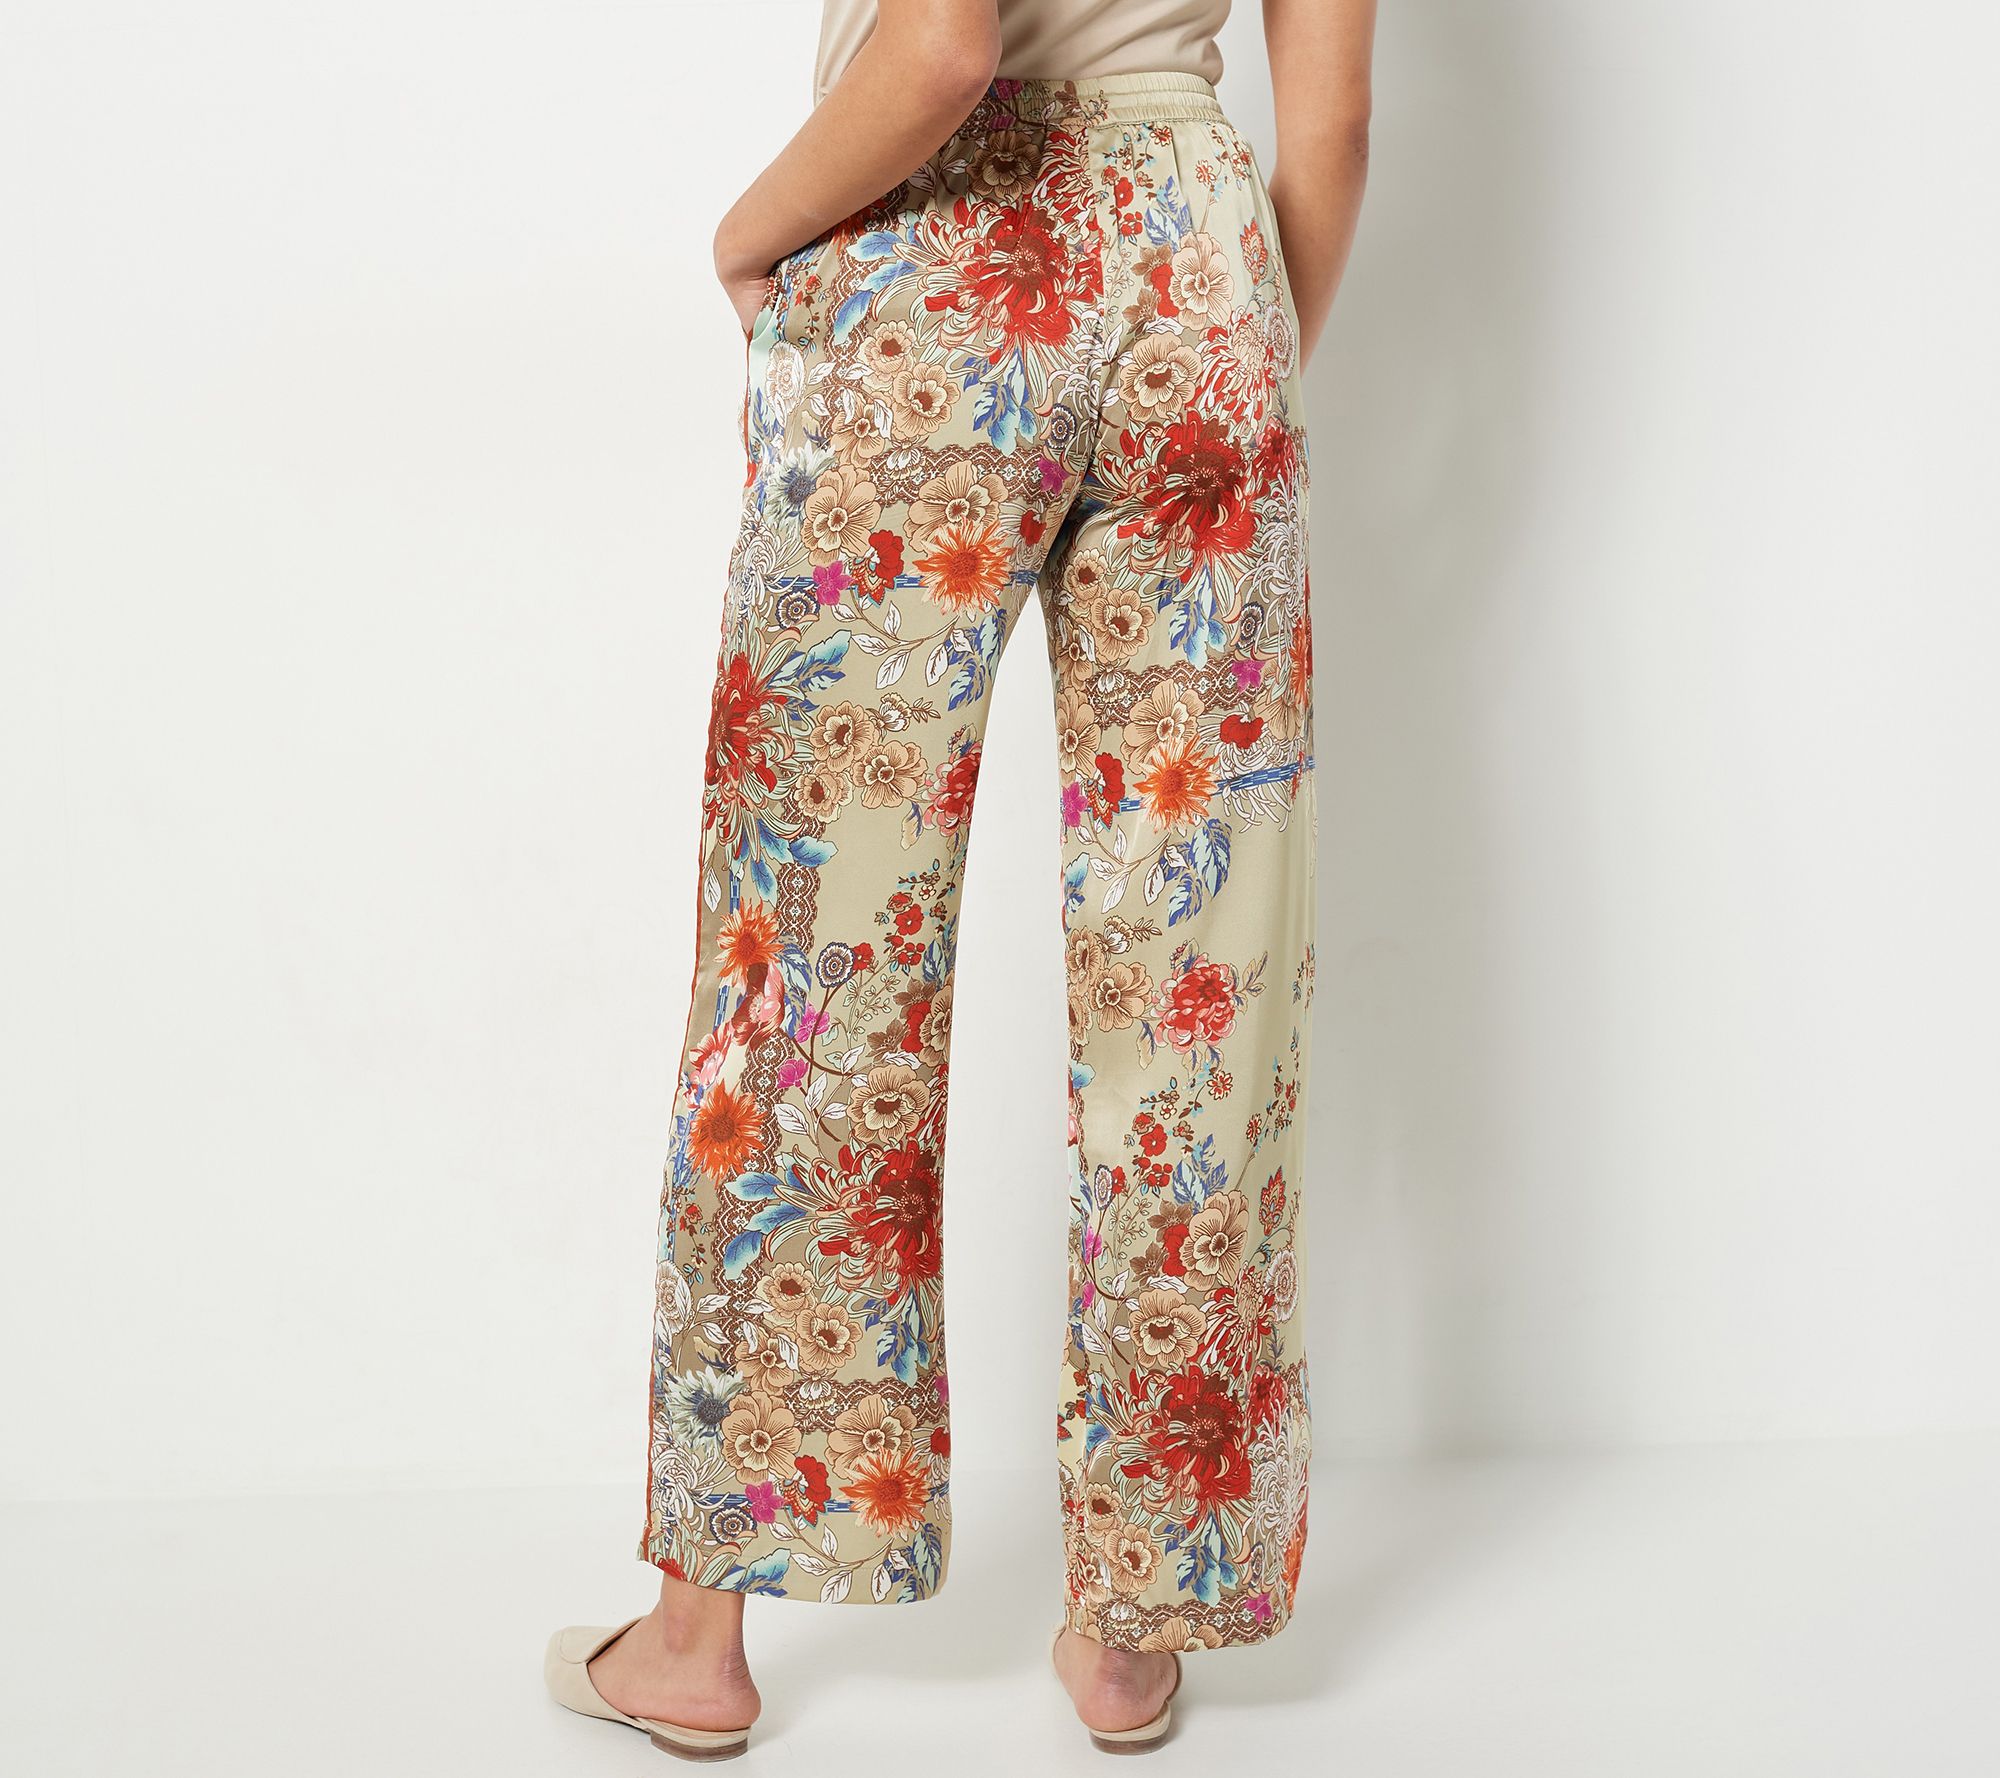 Attitudes by Renee Regular Casa Comfy Printed Pant w/ Piping Details ...